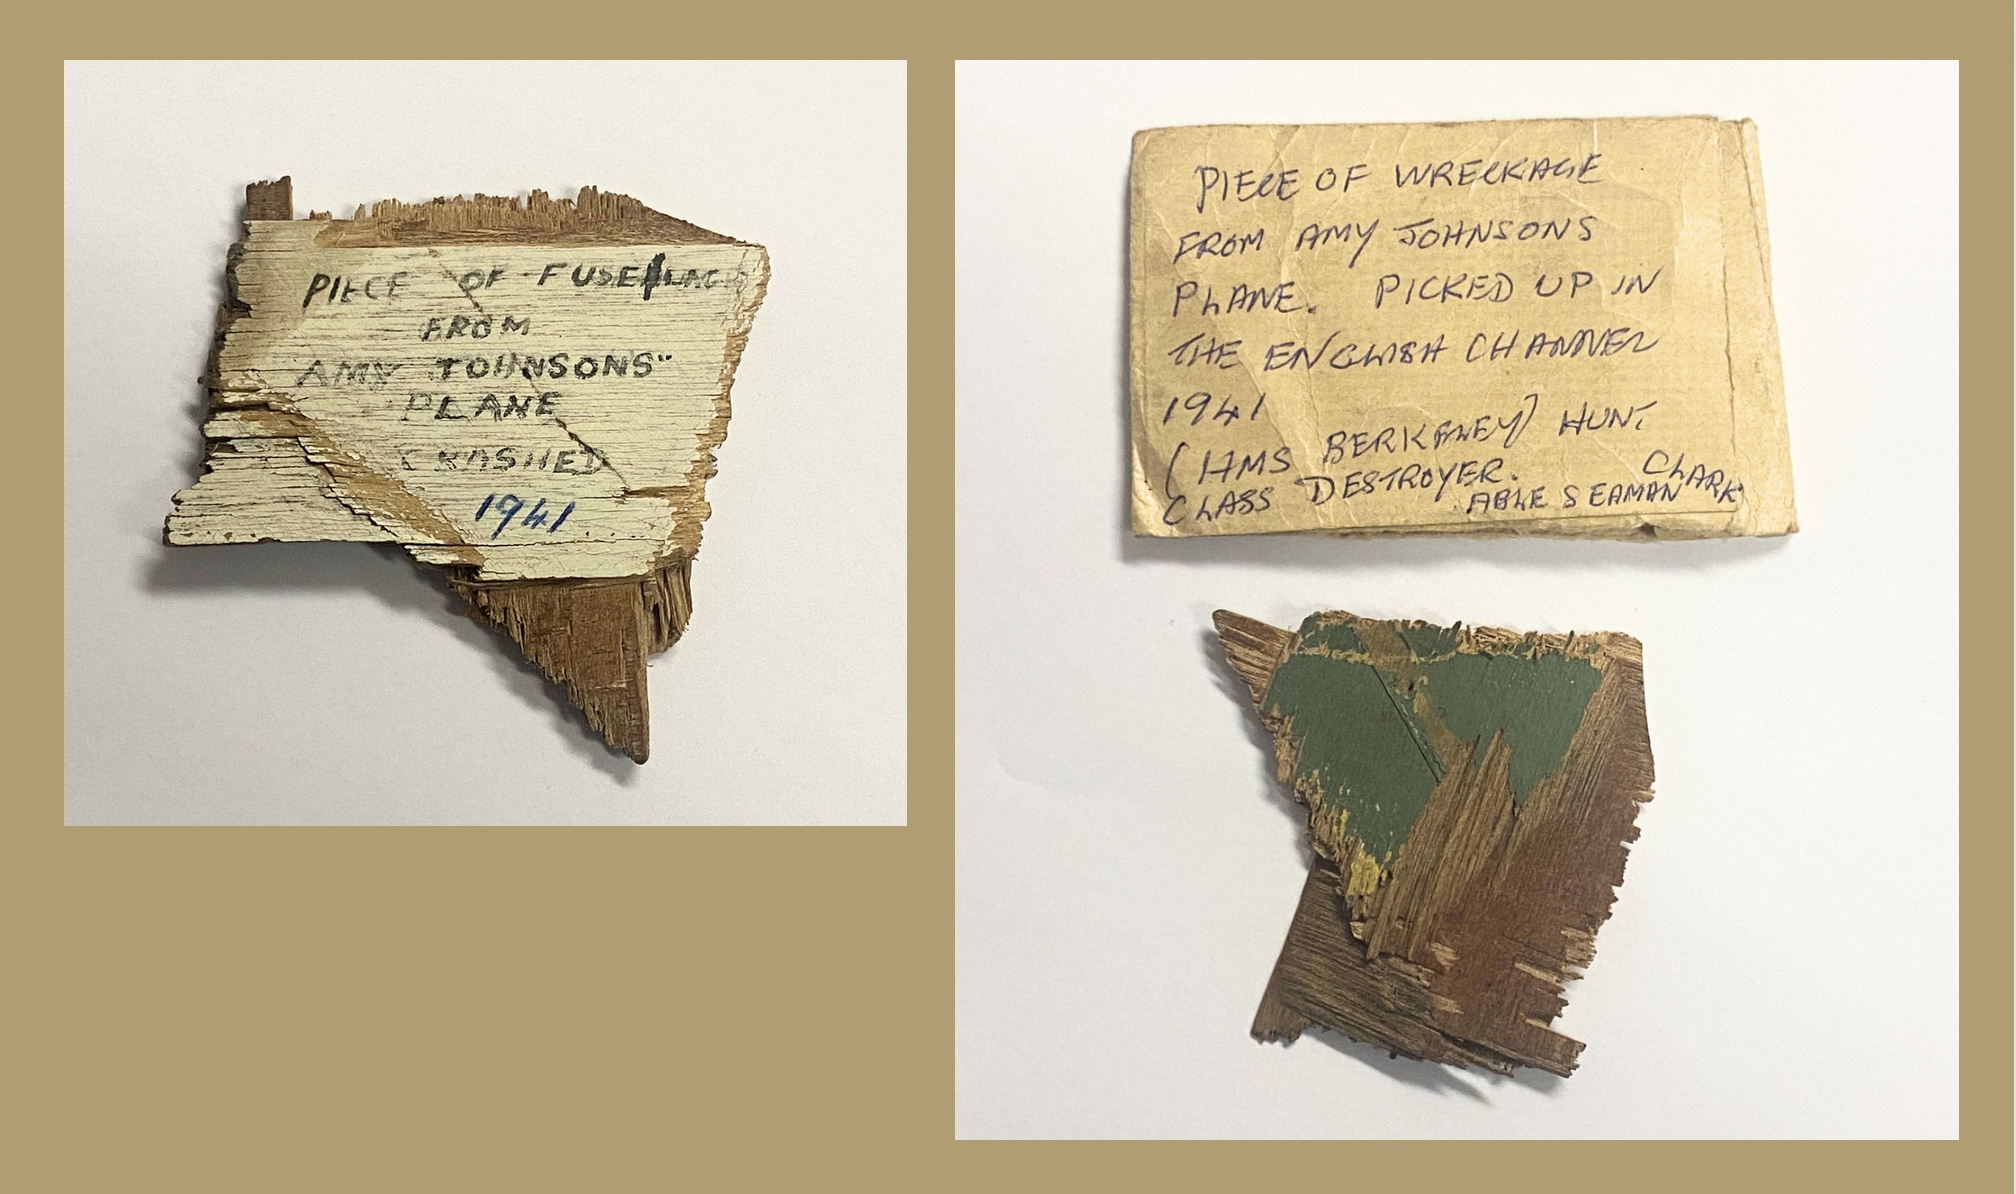 Amy Johnson plane fragment in sale – Antique Collecting